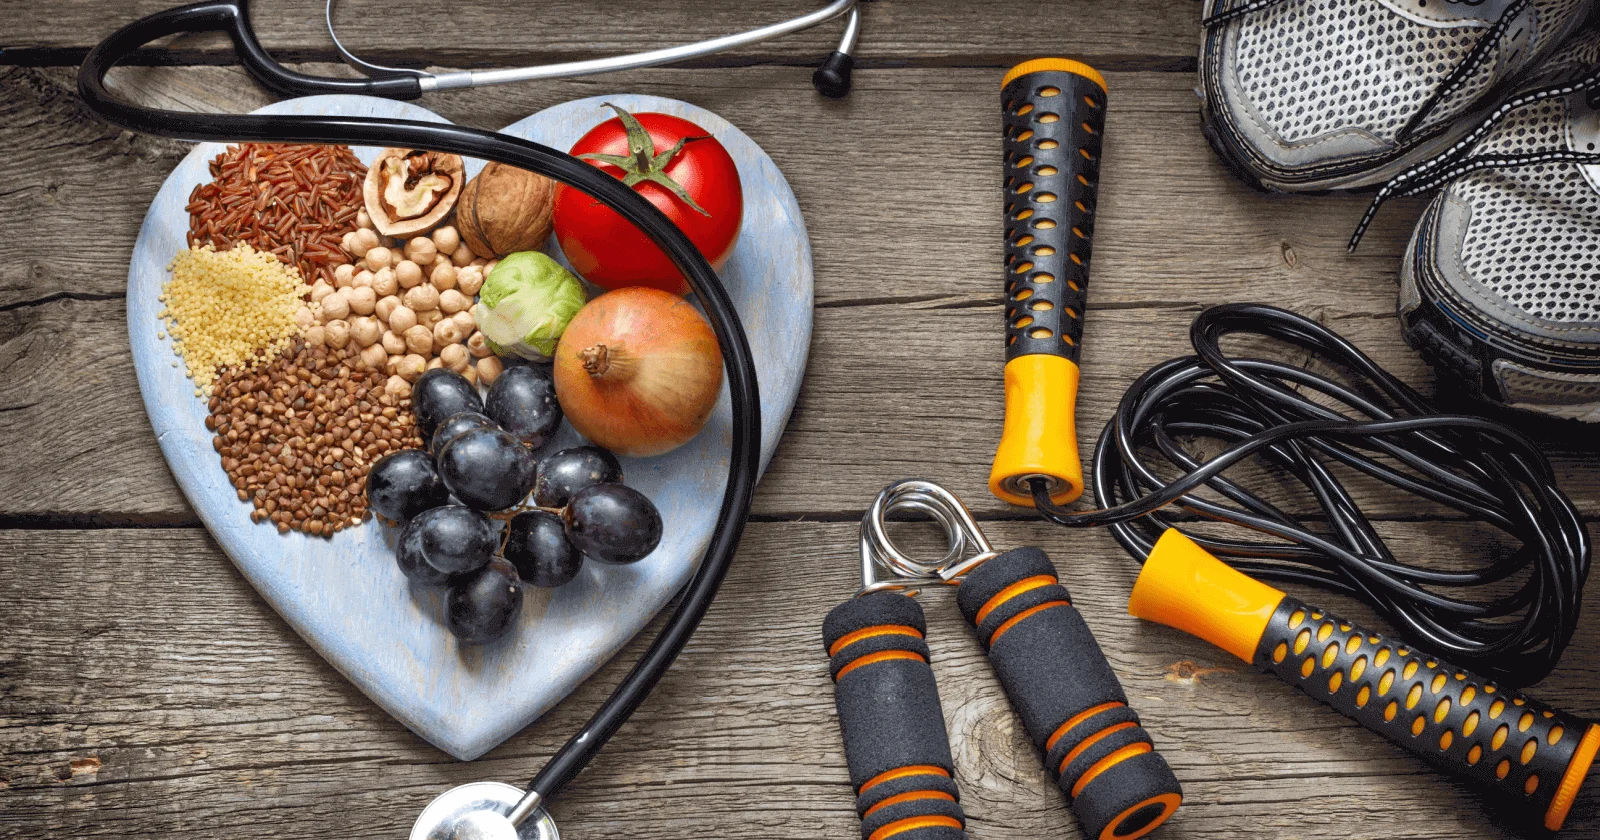 The impact of macronutrients (carbohydrates, fats, and proteins) on health